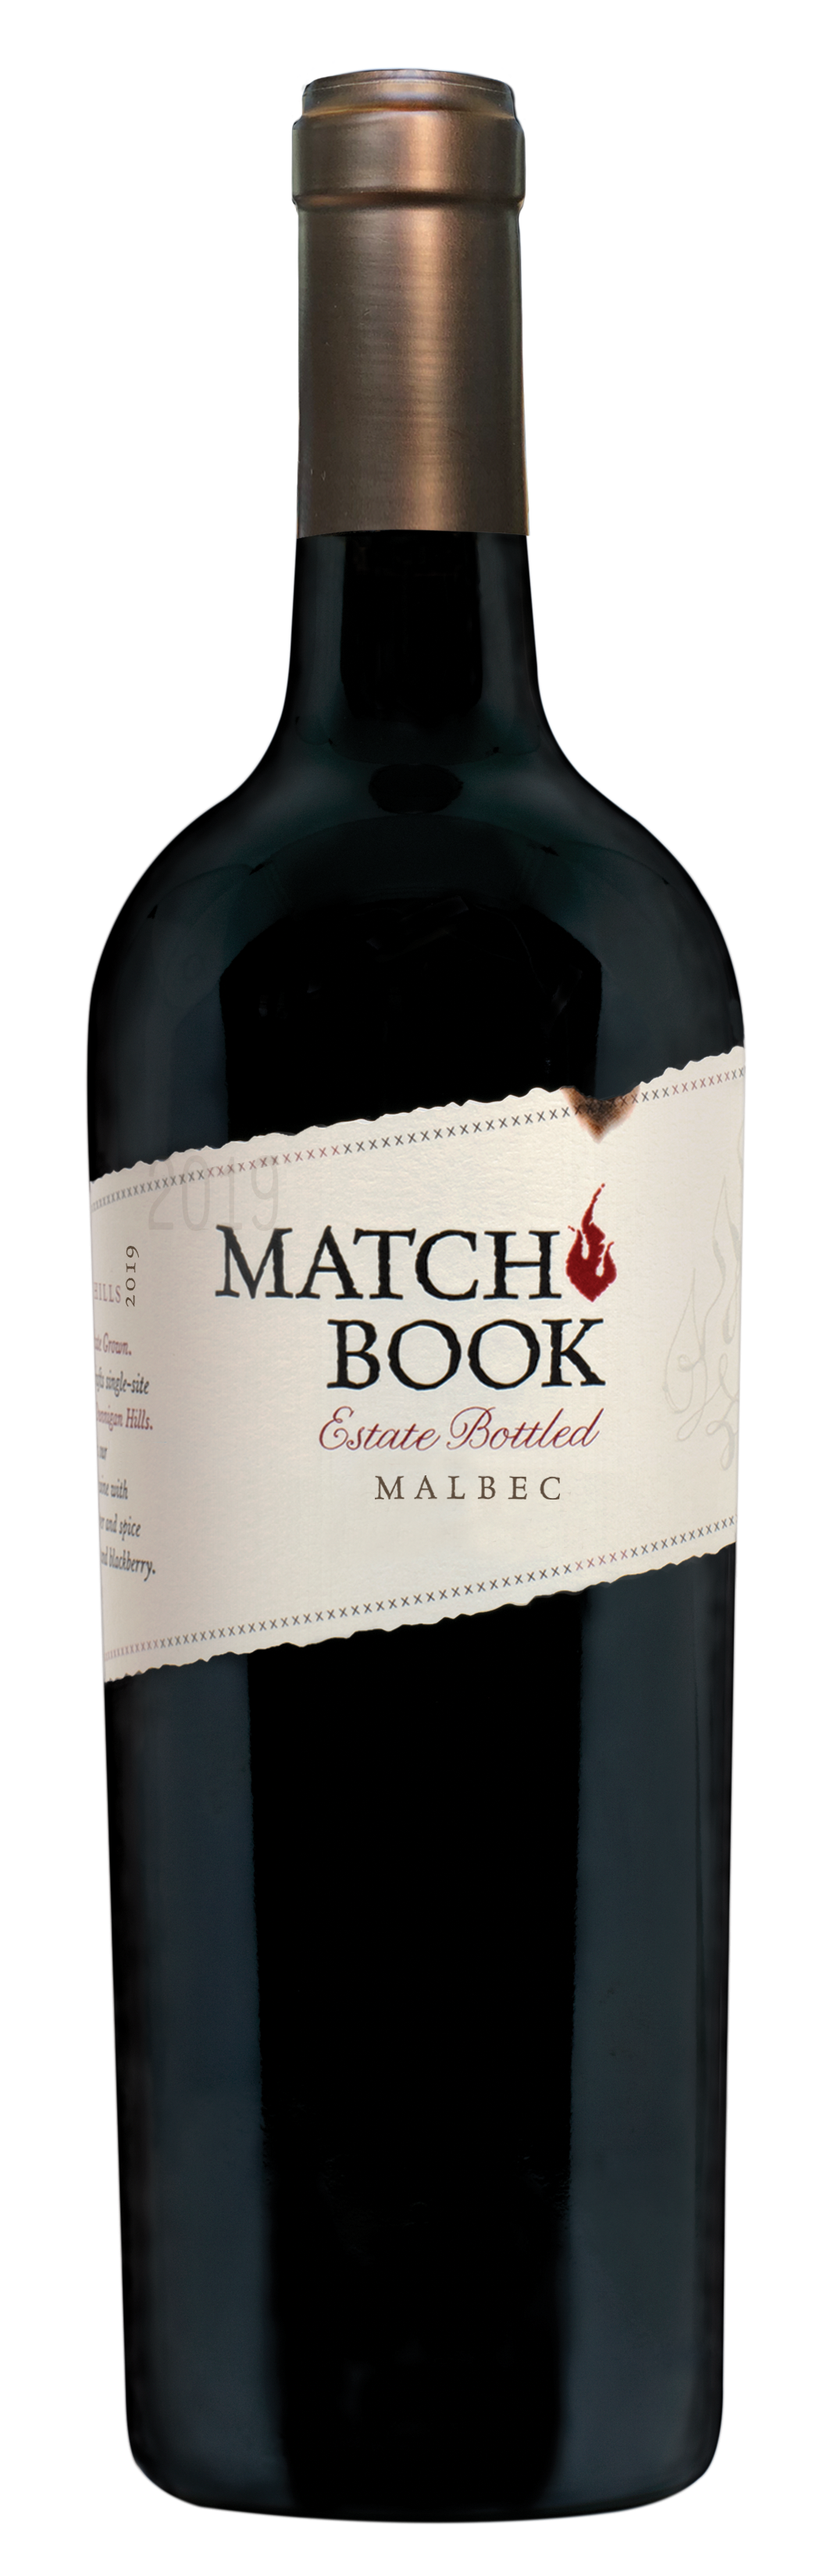 Product Image for 2019 Matchbook Malbec